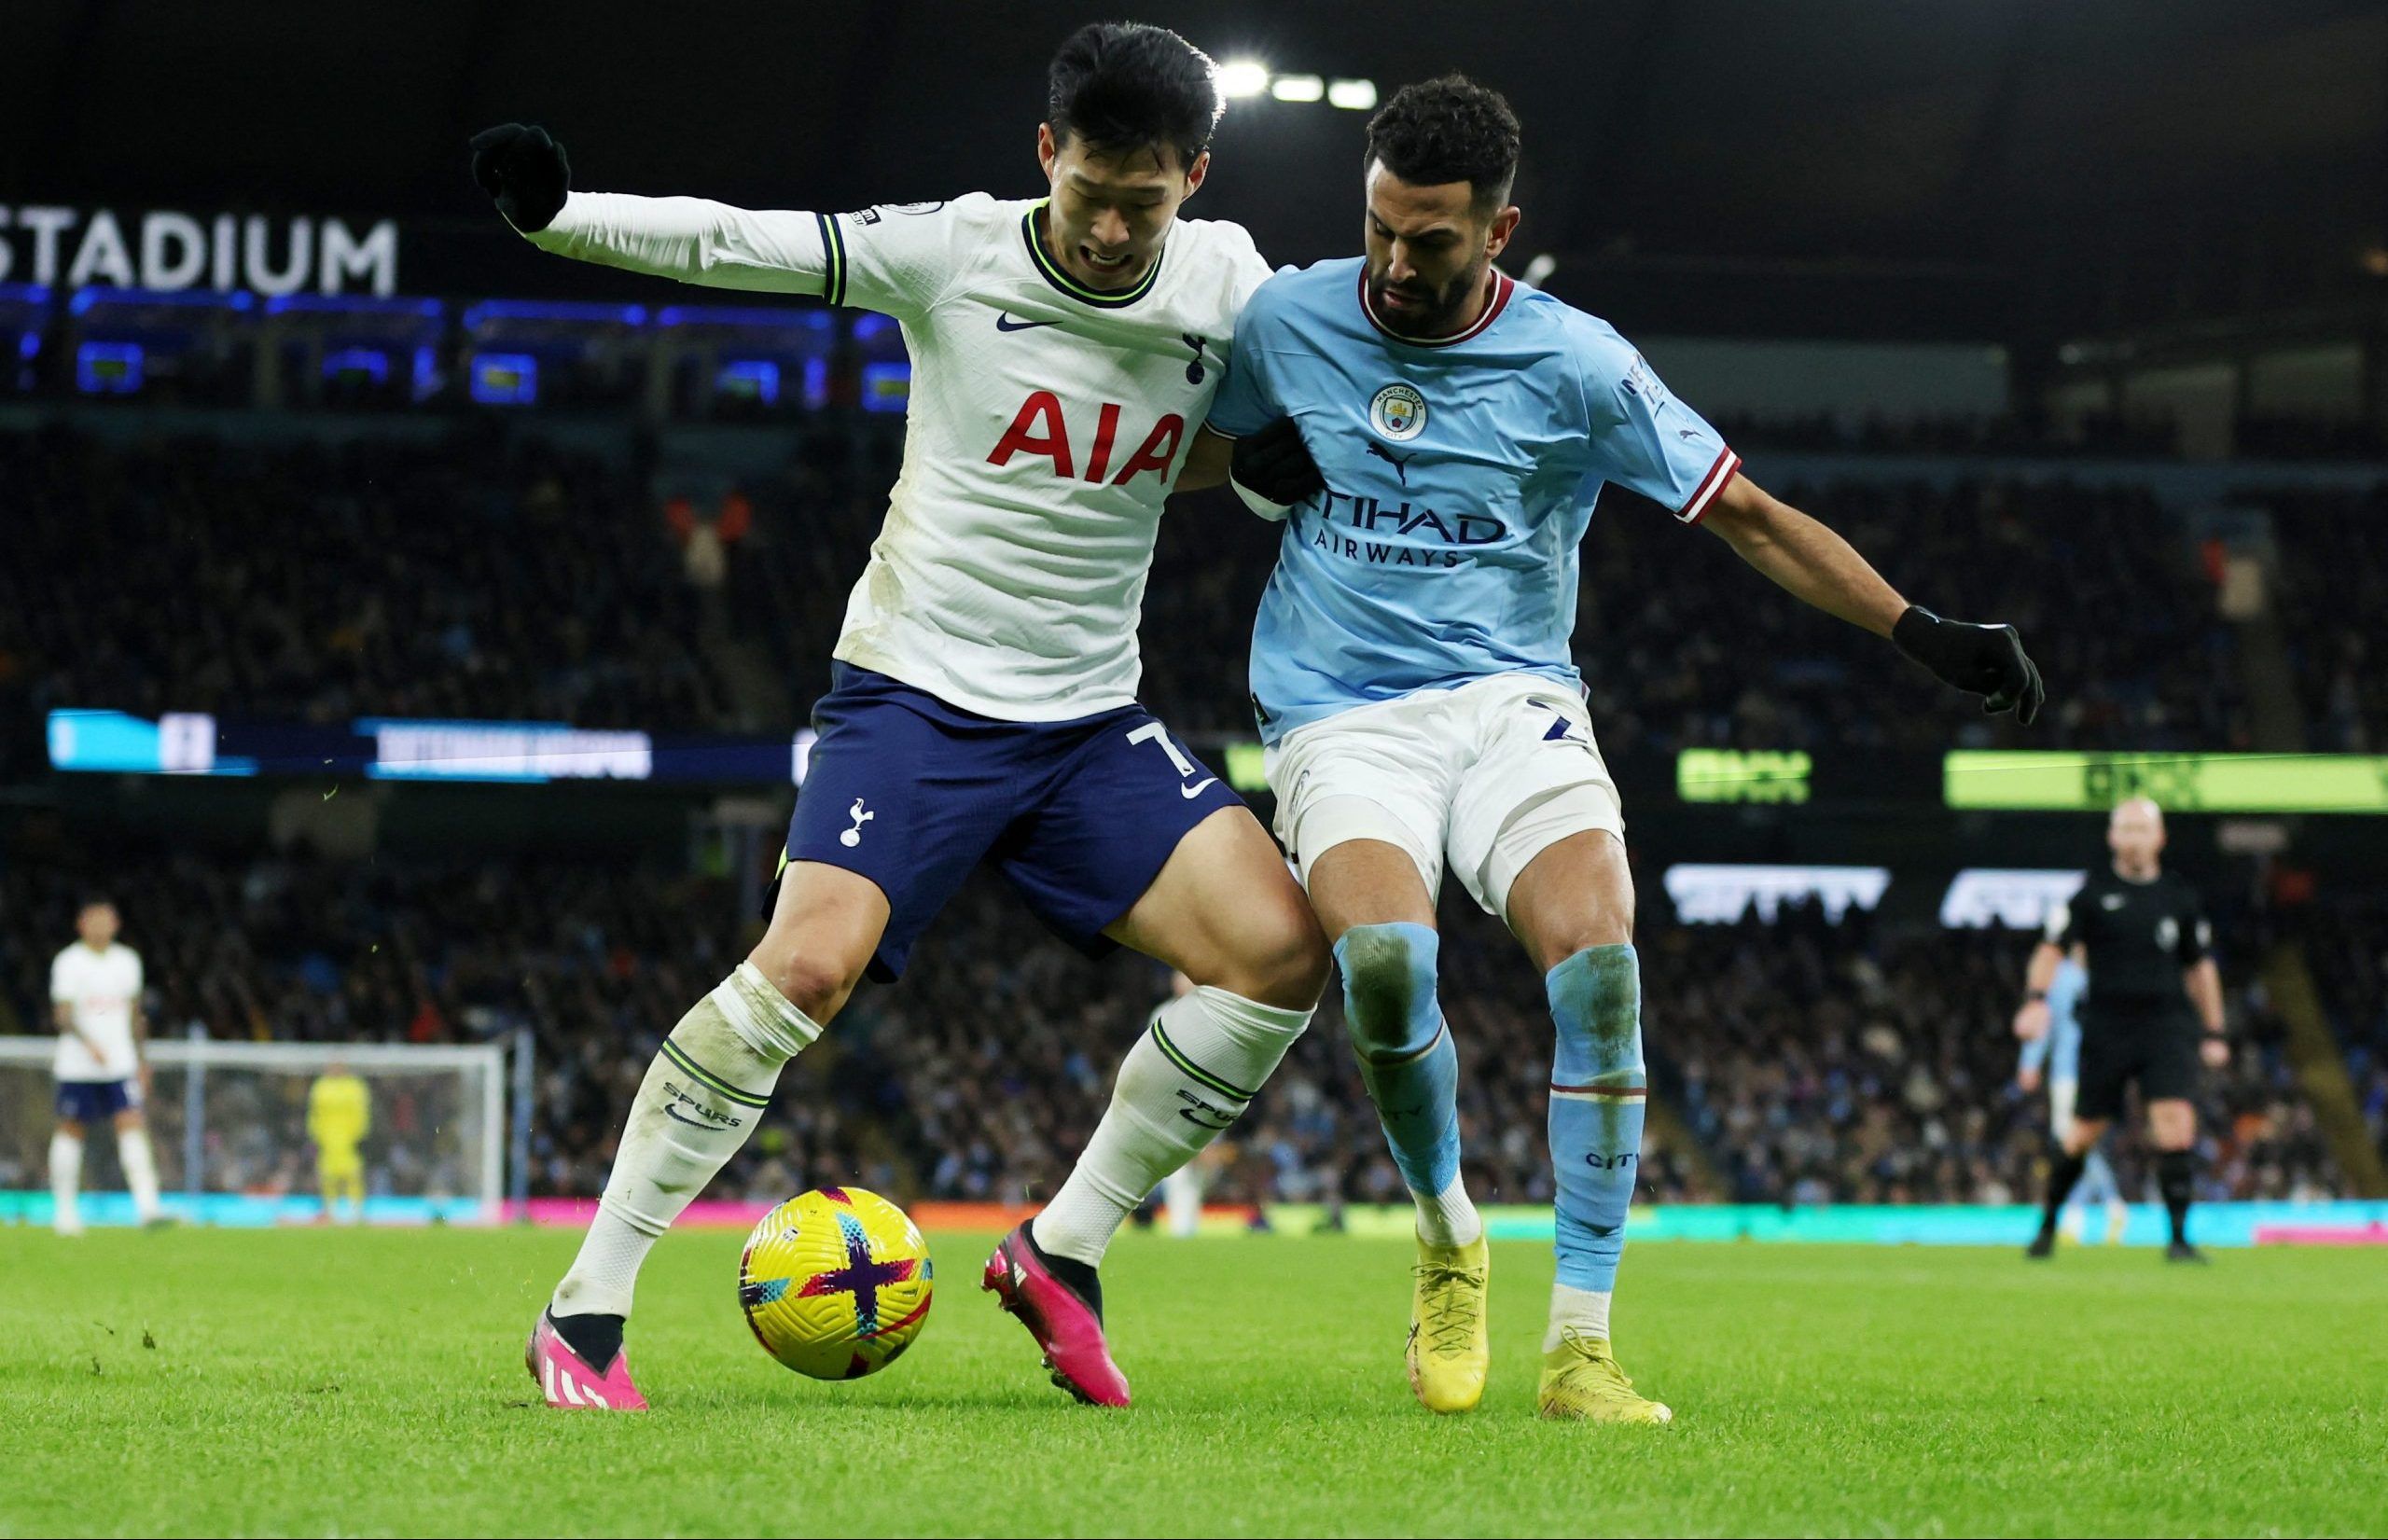 Soccer Football - Premier League - Manchester City v Tottenham Hotspur - Etihad Stadium, Manchester, Britain - January 19, 2023 Tottenham Hotspur's Son Heung-min in action with Manchester City's Riyad Mahrez Action Images via Reuters/Lee Smith EDITORIAL USE ONLY. No use with unauthorized audio, video, data, fixture lists, club/league logos or 'live' services. Online in-match use limited to 75 images, no video emulation. No use in betting, games or single club /league/player publications.  Please